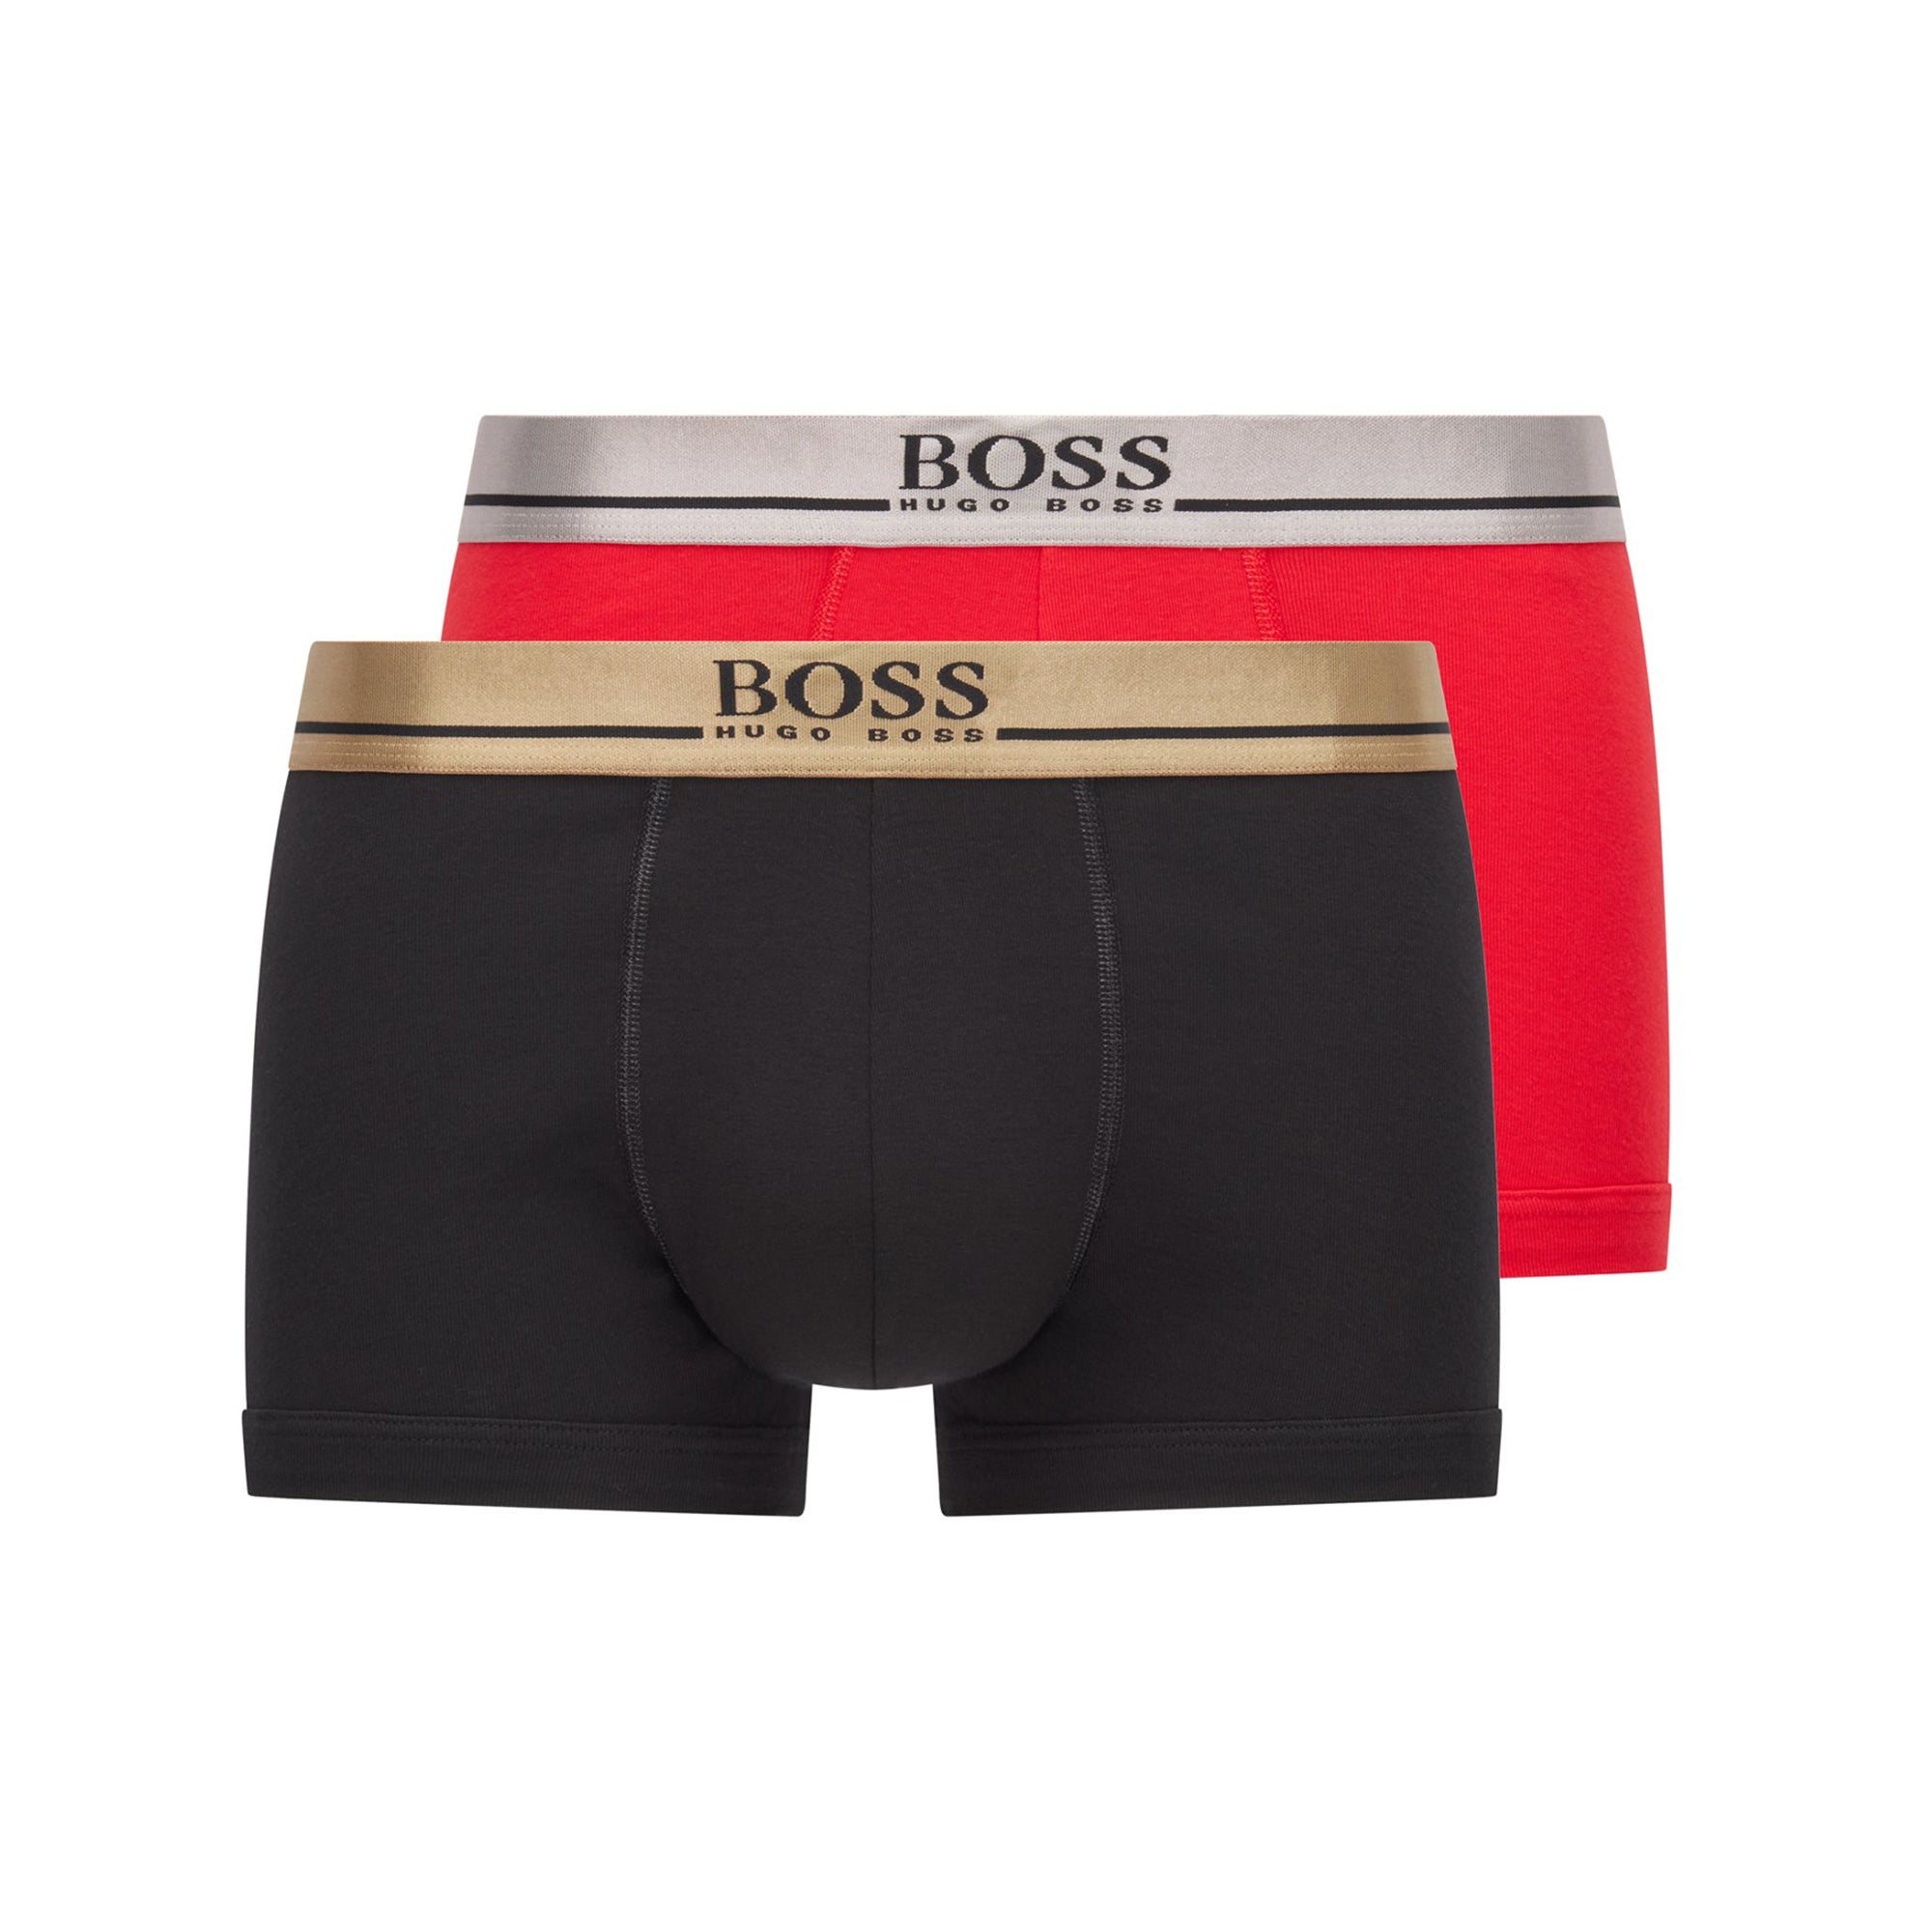 BOSS Cotton Trunk 2-Pack Gift Set 50463065 Red Black 647 | Function18 ...